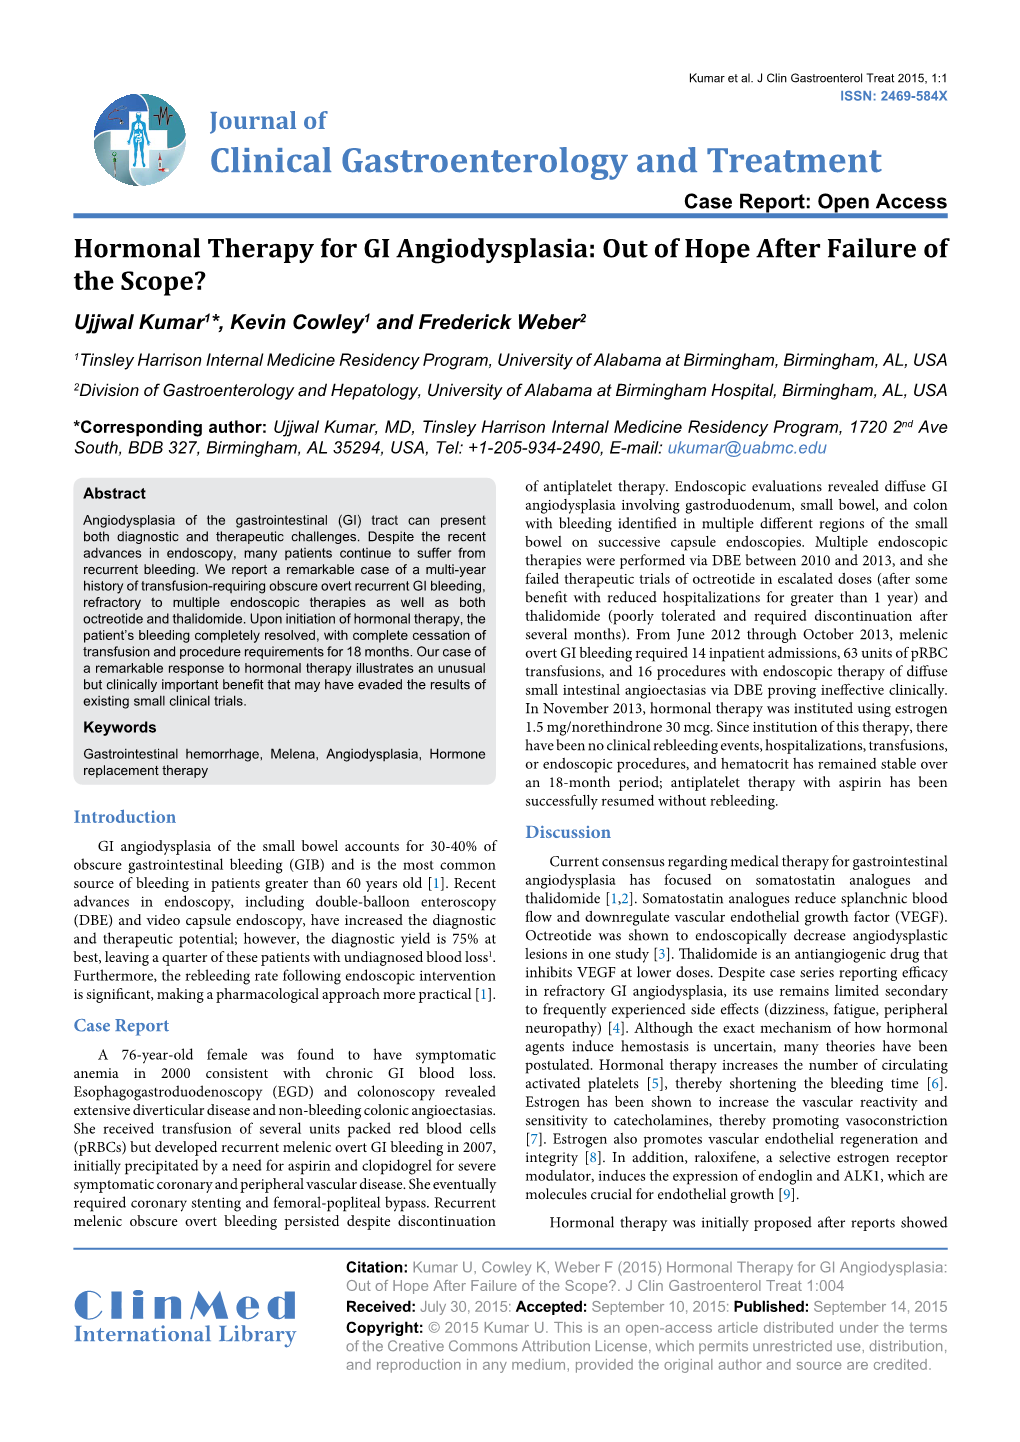 Hormonal Therapy for GI Angiodysplasia: out of Hope After Failure of the Scope? Ujjwal Kumar1*, Kevin Cowley1 and Frederick Weber2